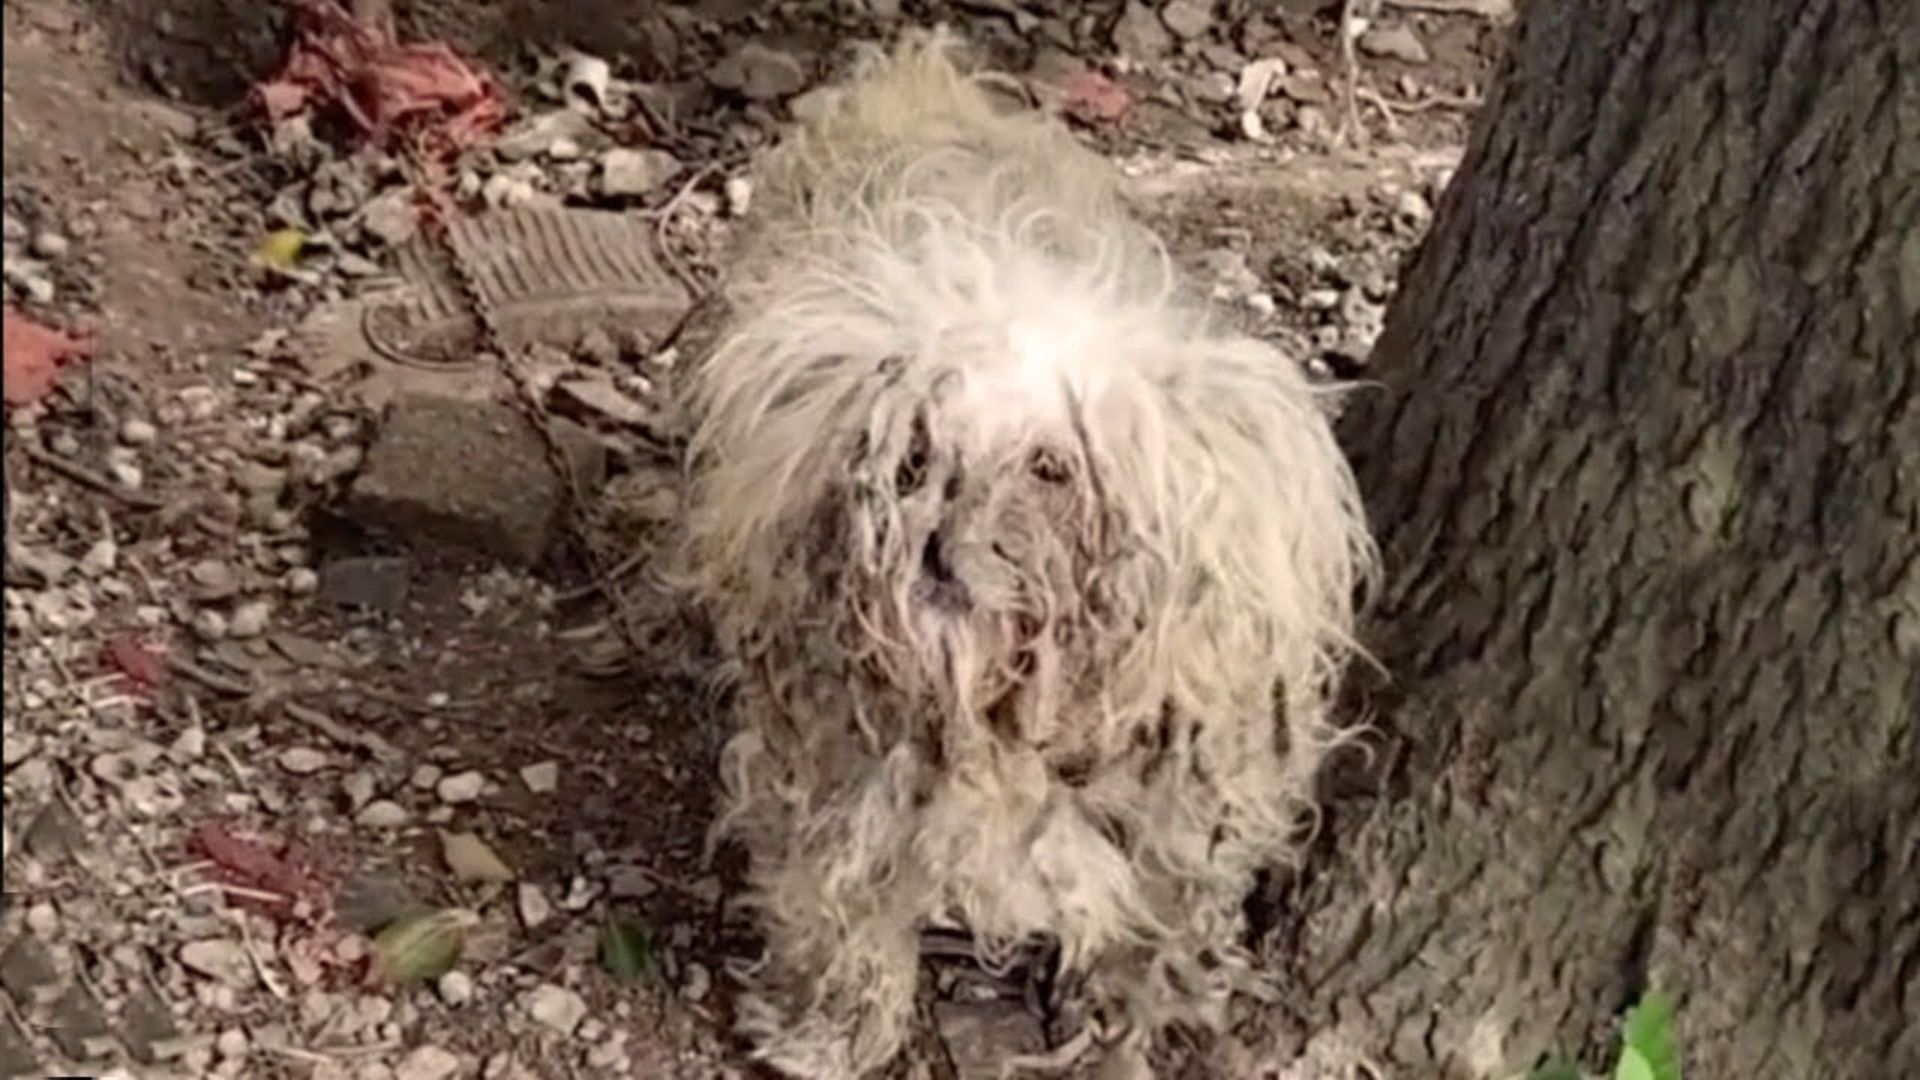 Rescuers Shocked To Find A Dog Abandoned And Left Chained In A Garden